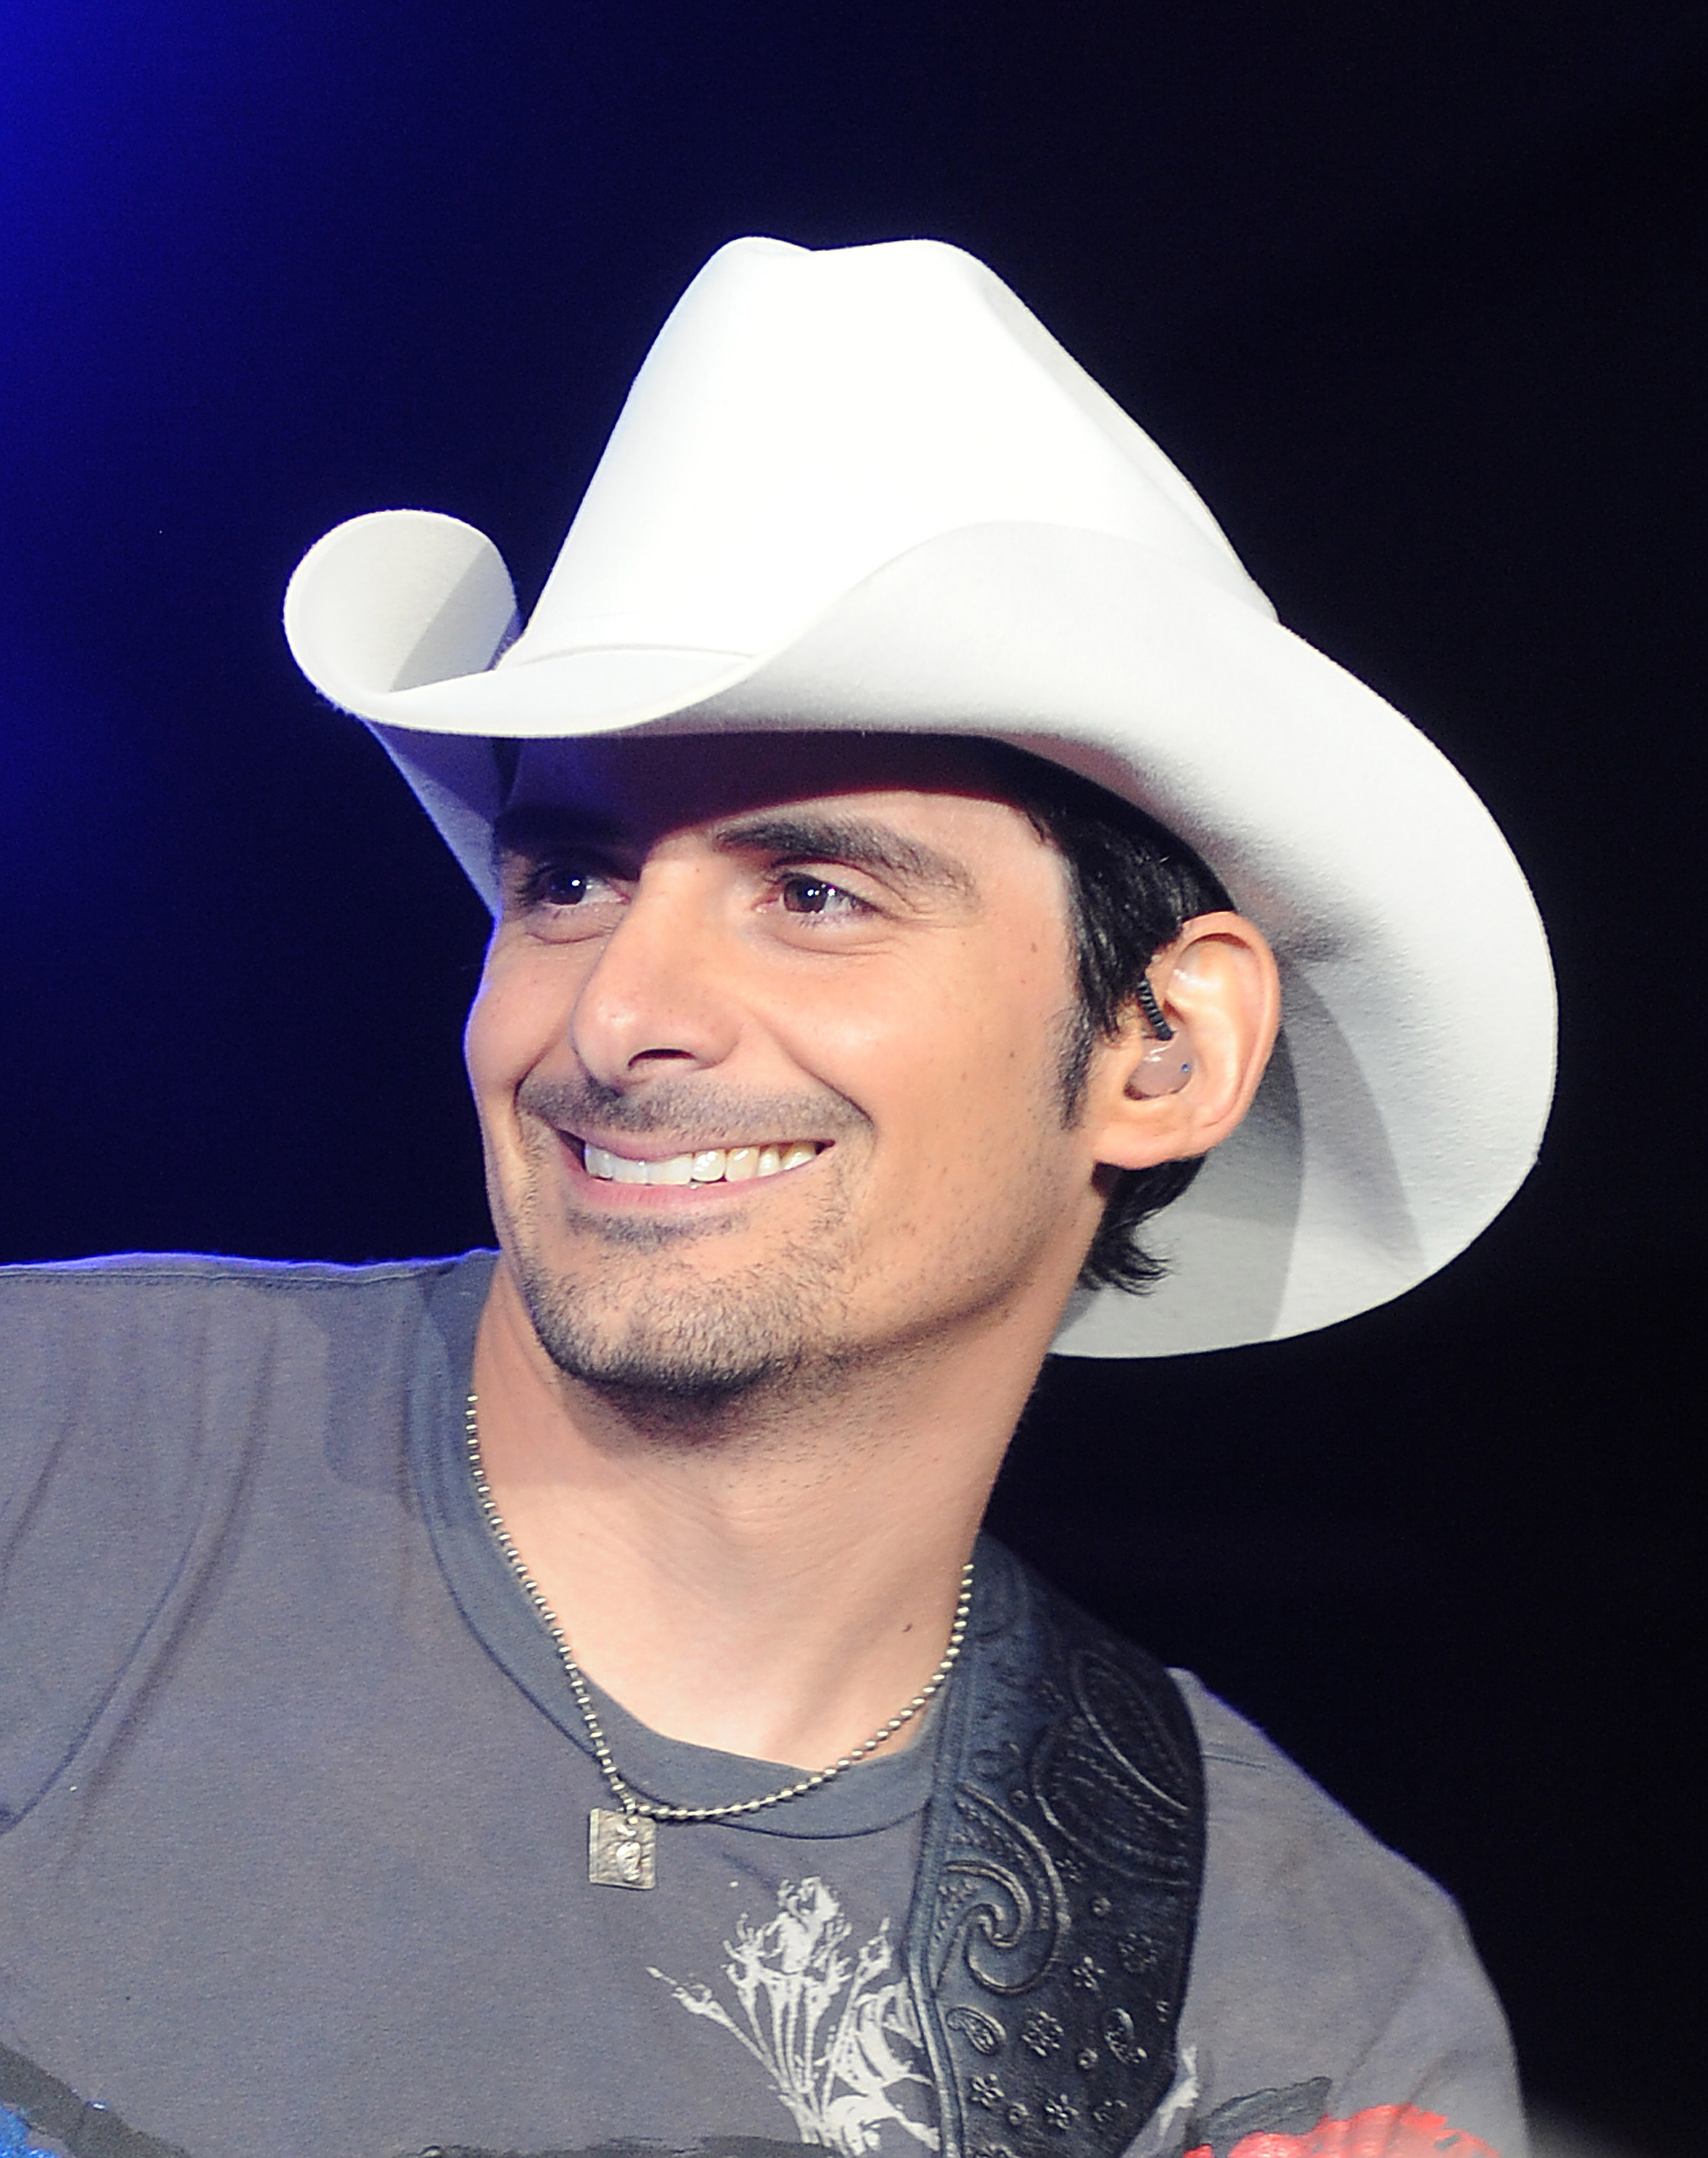 Country Music Superstar Guitarist and Vocalist Brad Paisley performs at Shoreline Amphitheatre on September 25, 2009 in Mountain View, California. | Source: Getty Images